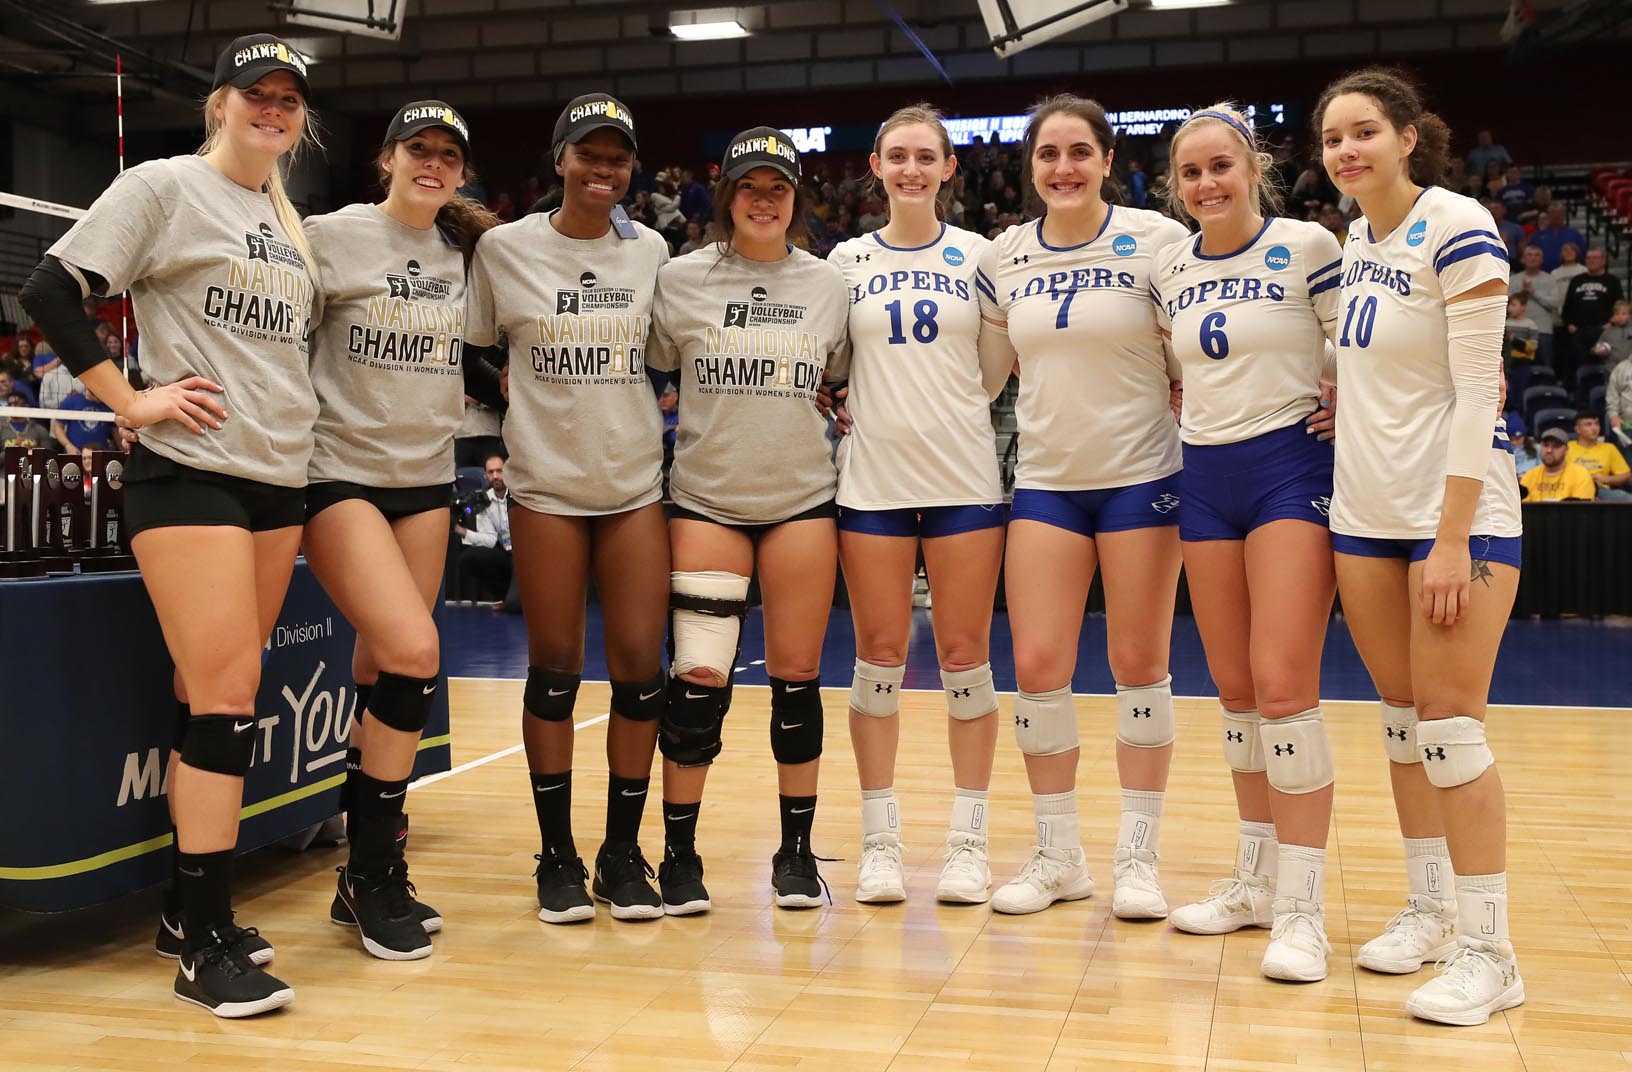 Joined by players from Cal State San Bernardino, UNK’s Mary Katherine Wolfe (18), Anna Squiers (7), Maddie Squiers (6) and Julianne Jackson (10) are recognized as all-tournament selections Saturday following the NCAA Division II championship match at the Auraria Event Center in Denver.